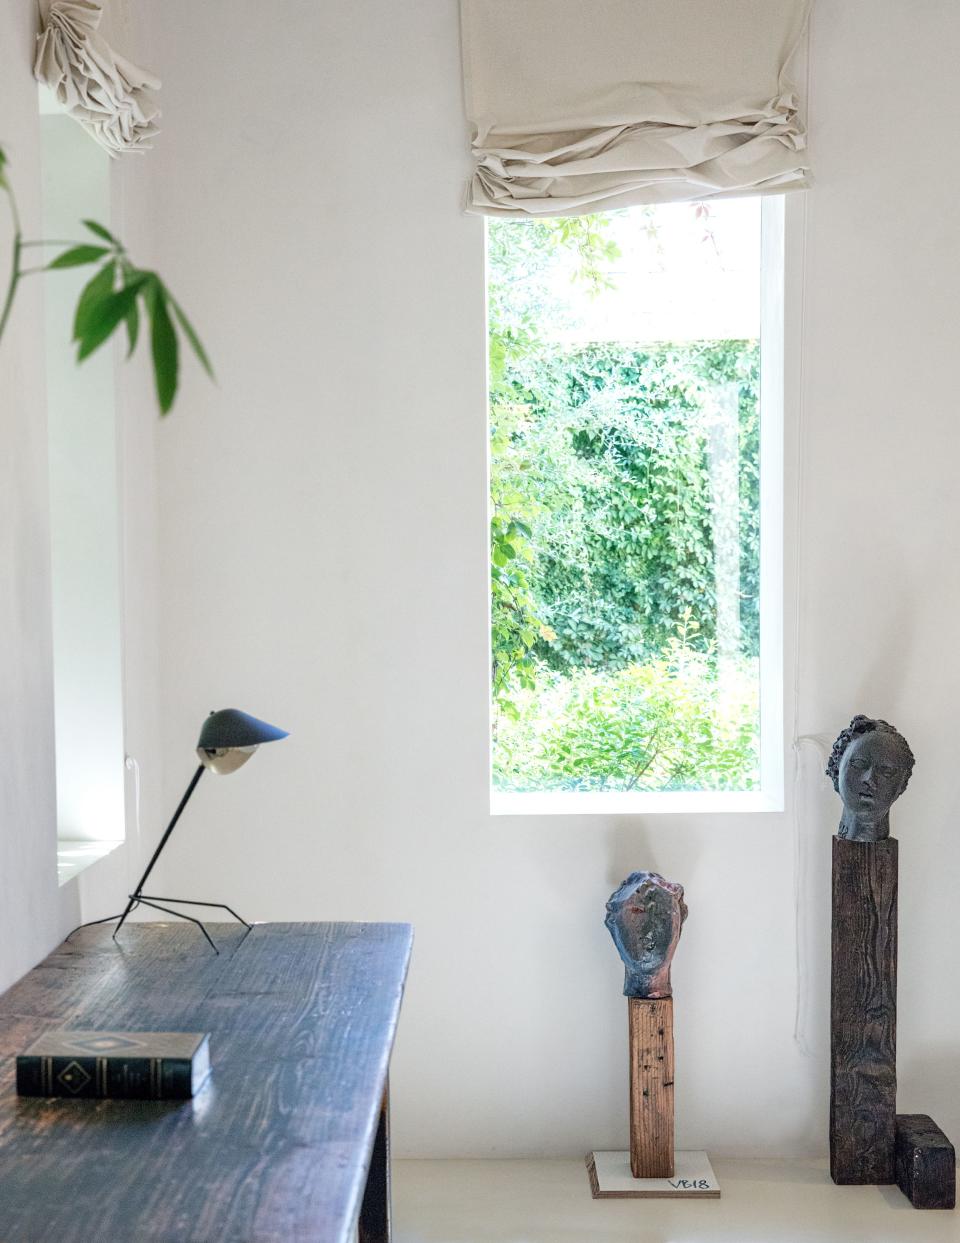 A sun-drenched corner of the home. Sculptures by Vanessa Beecroft; Serge Mouille desk lamp.